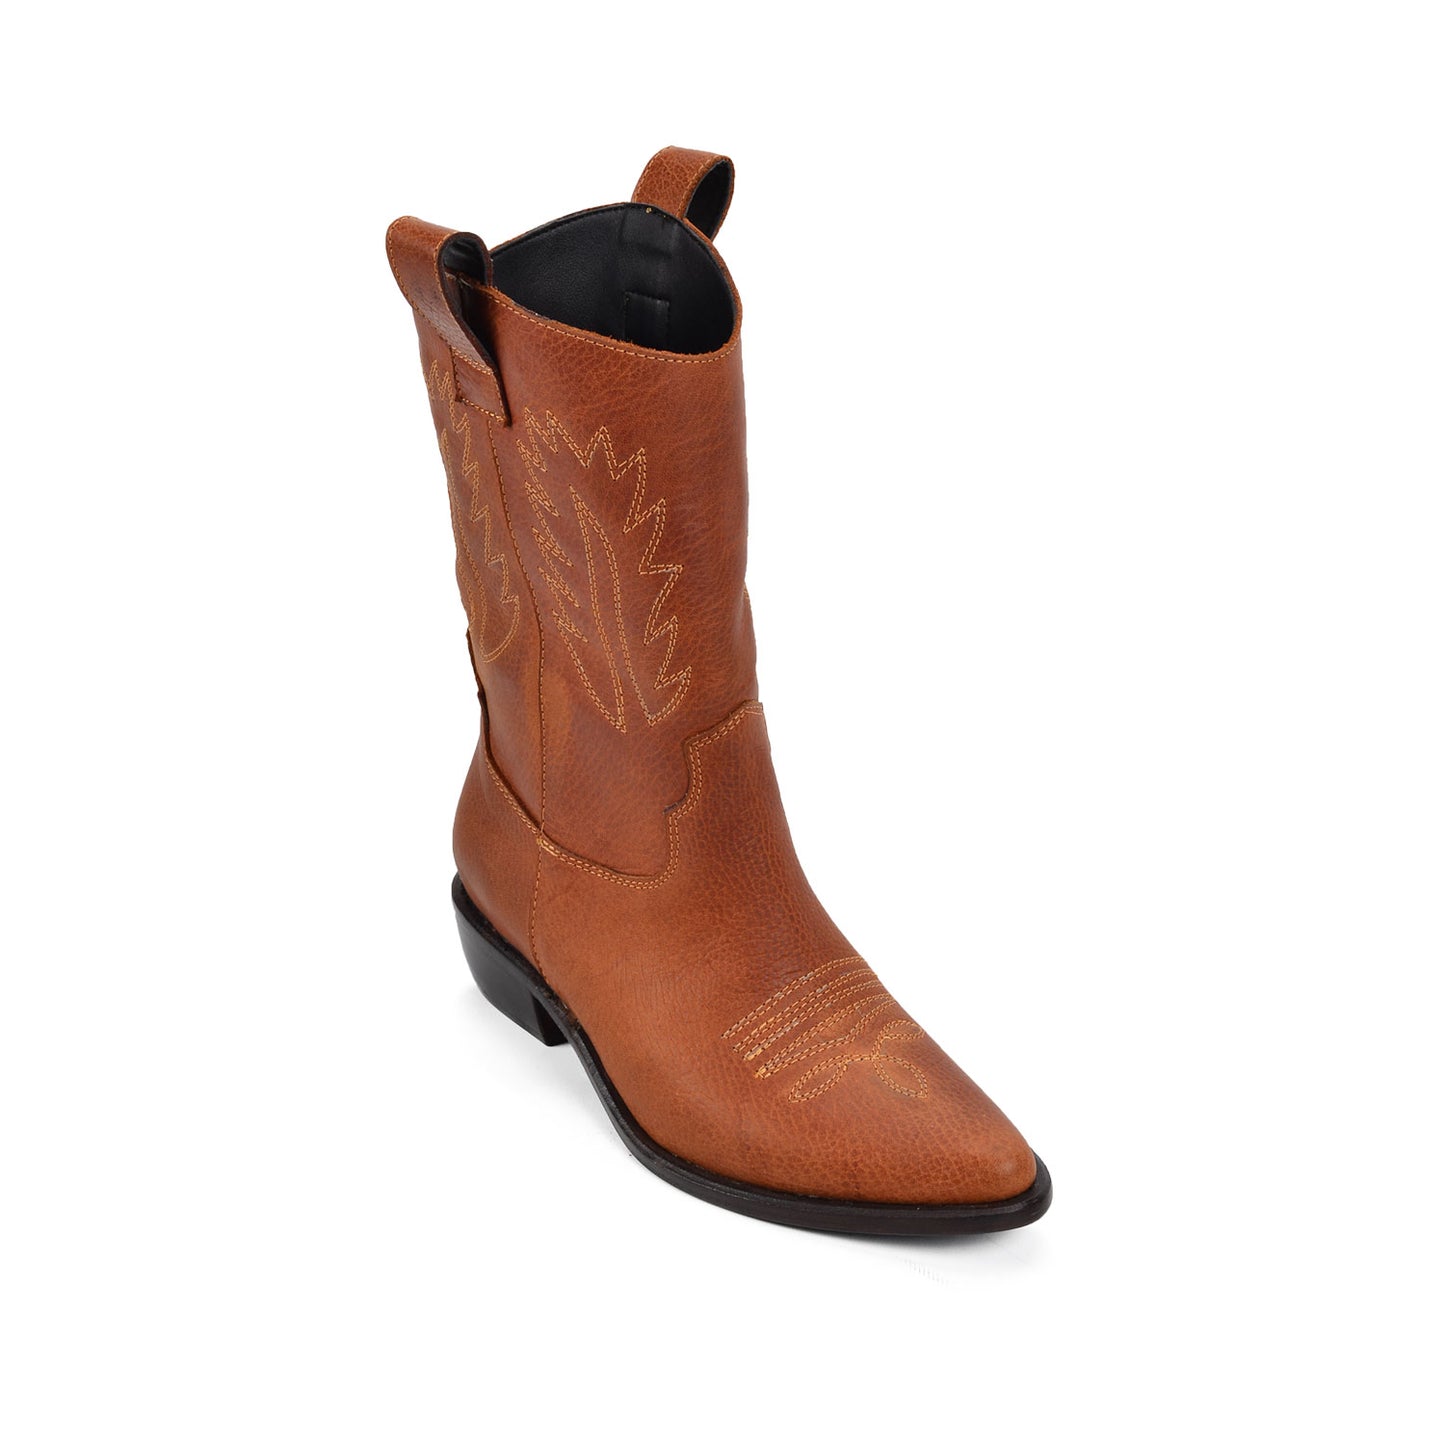 Juana Black | Leather Cowgirl Boots